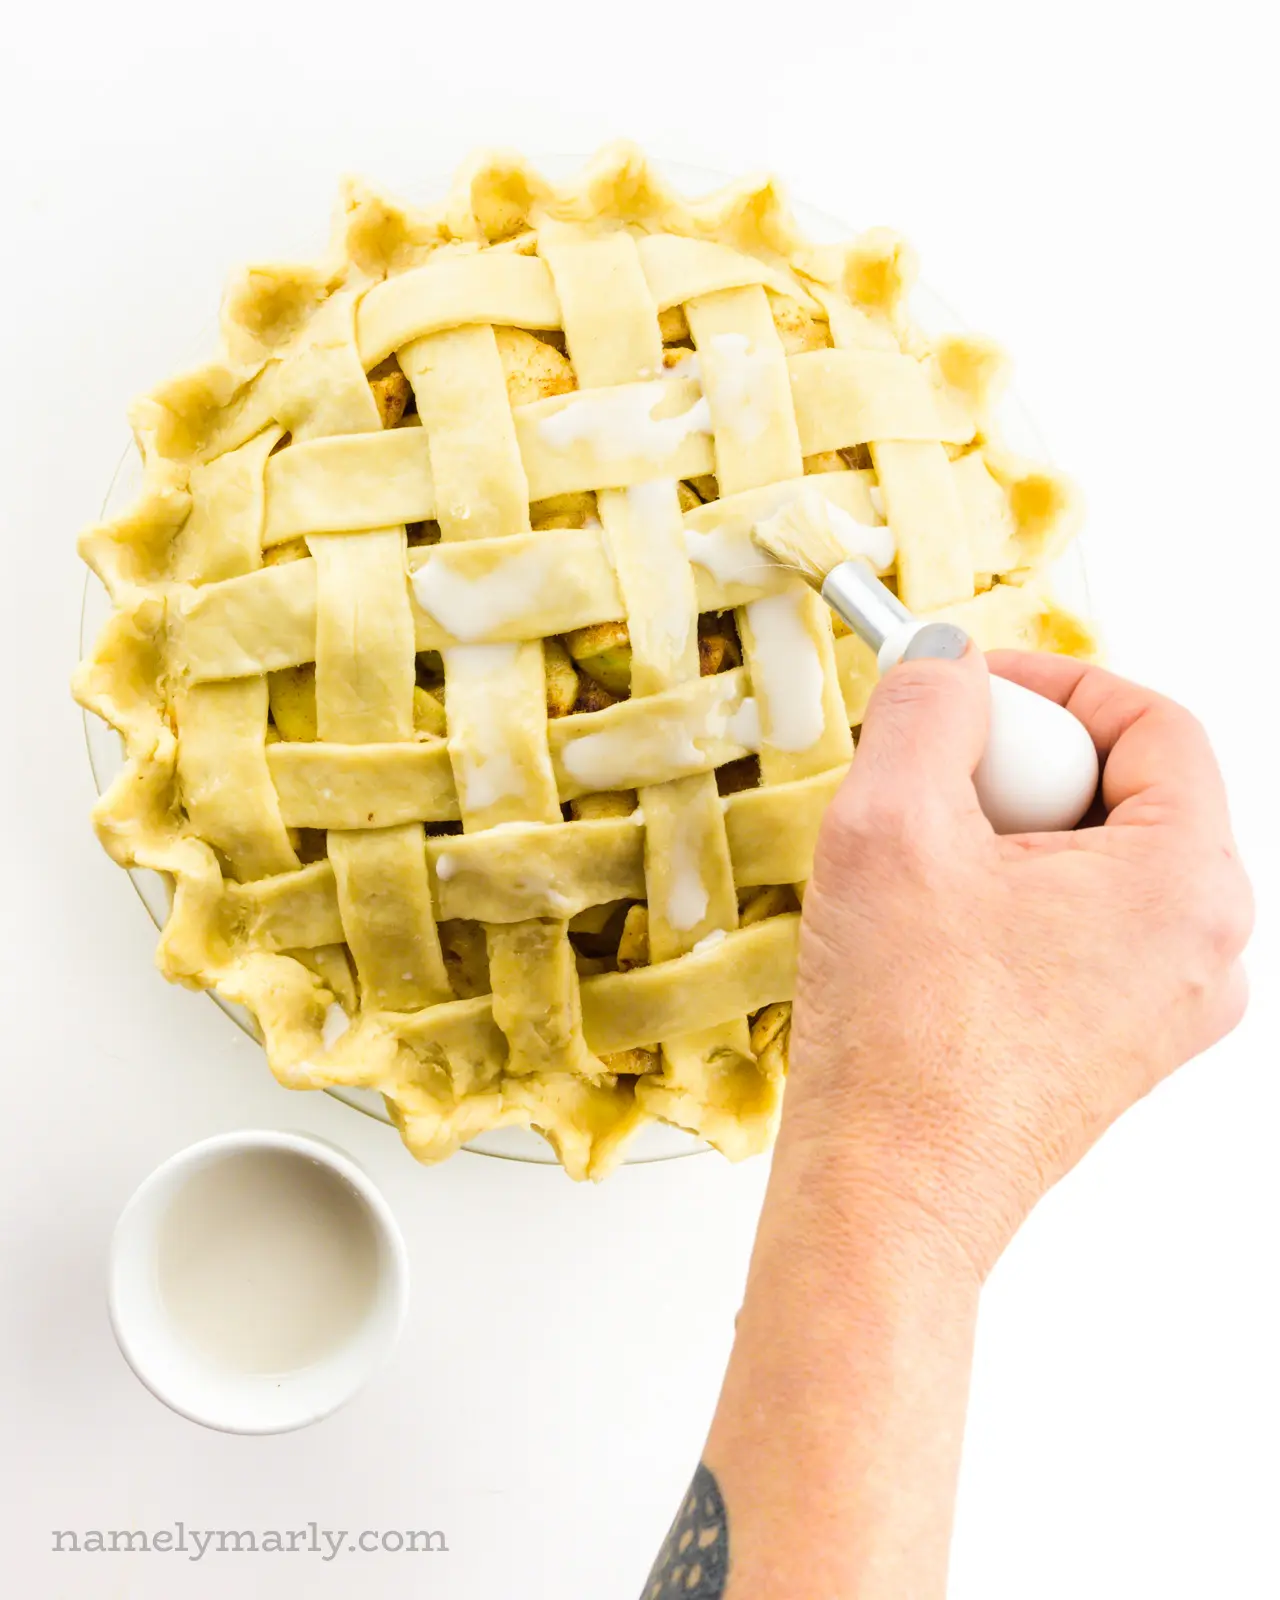 A hand holds a brush, adding vegan egg was to the unbaked pie crust.